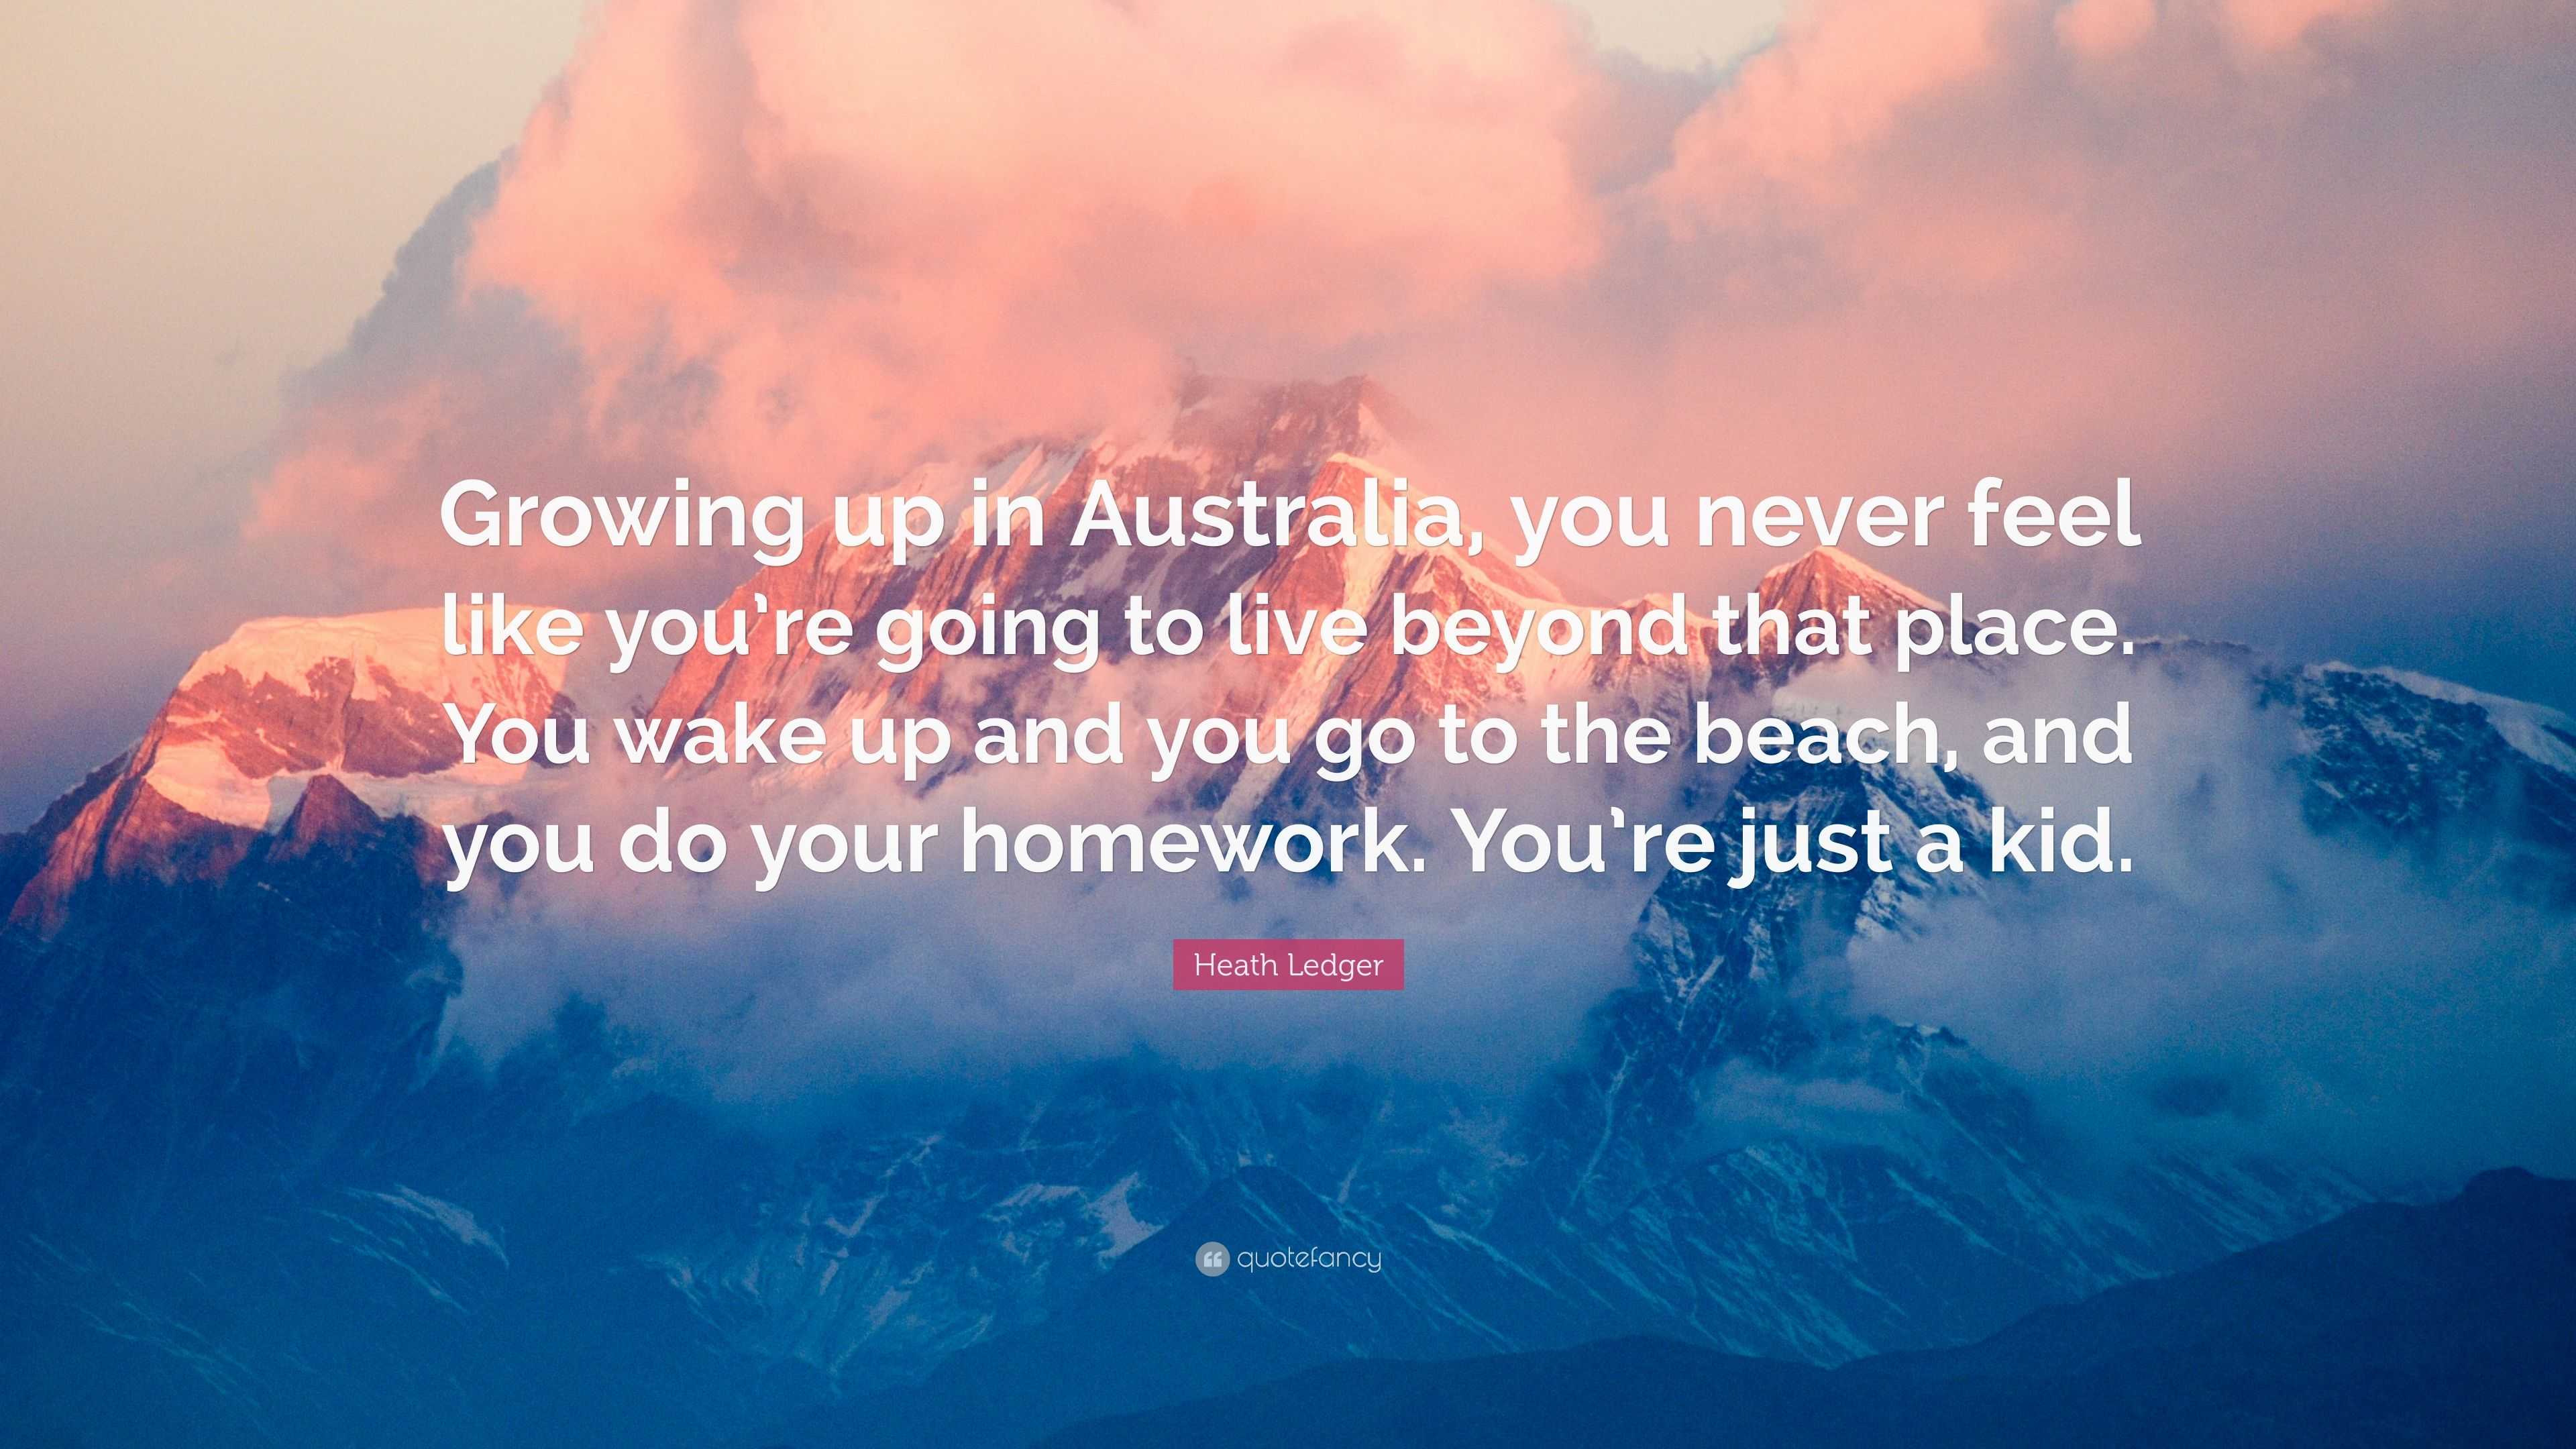 Heath Ledger Quote “Growing up in Australia, you never feel like youre going to live beyond that place